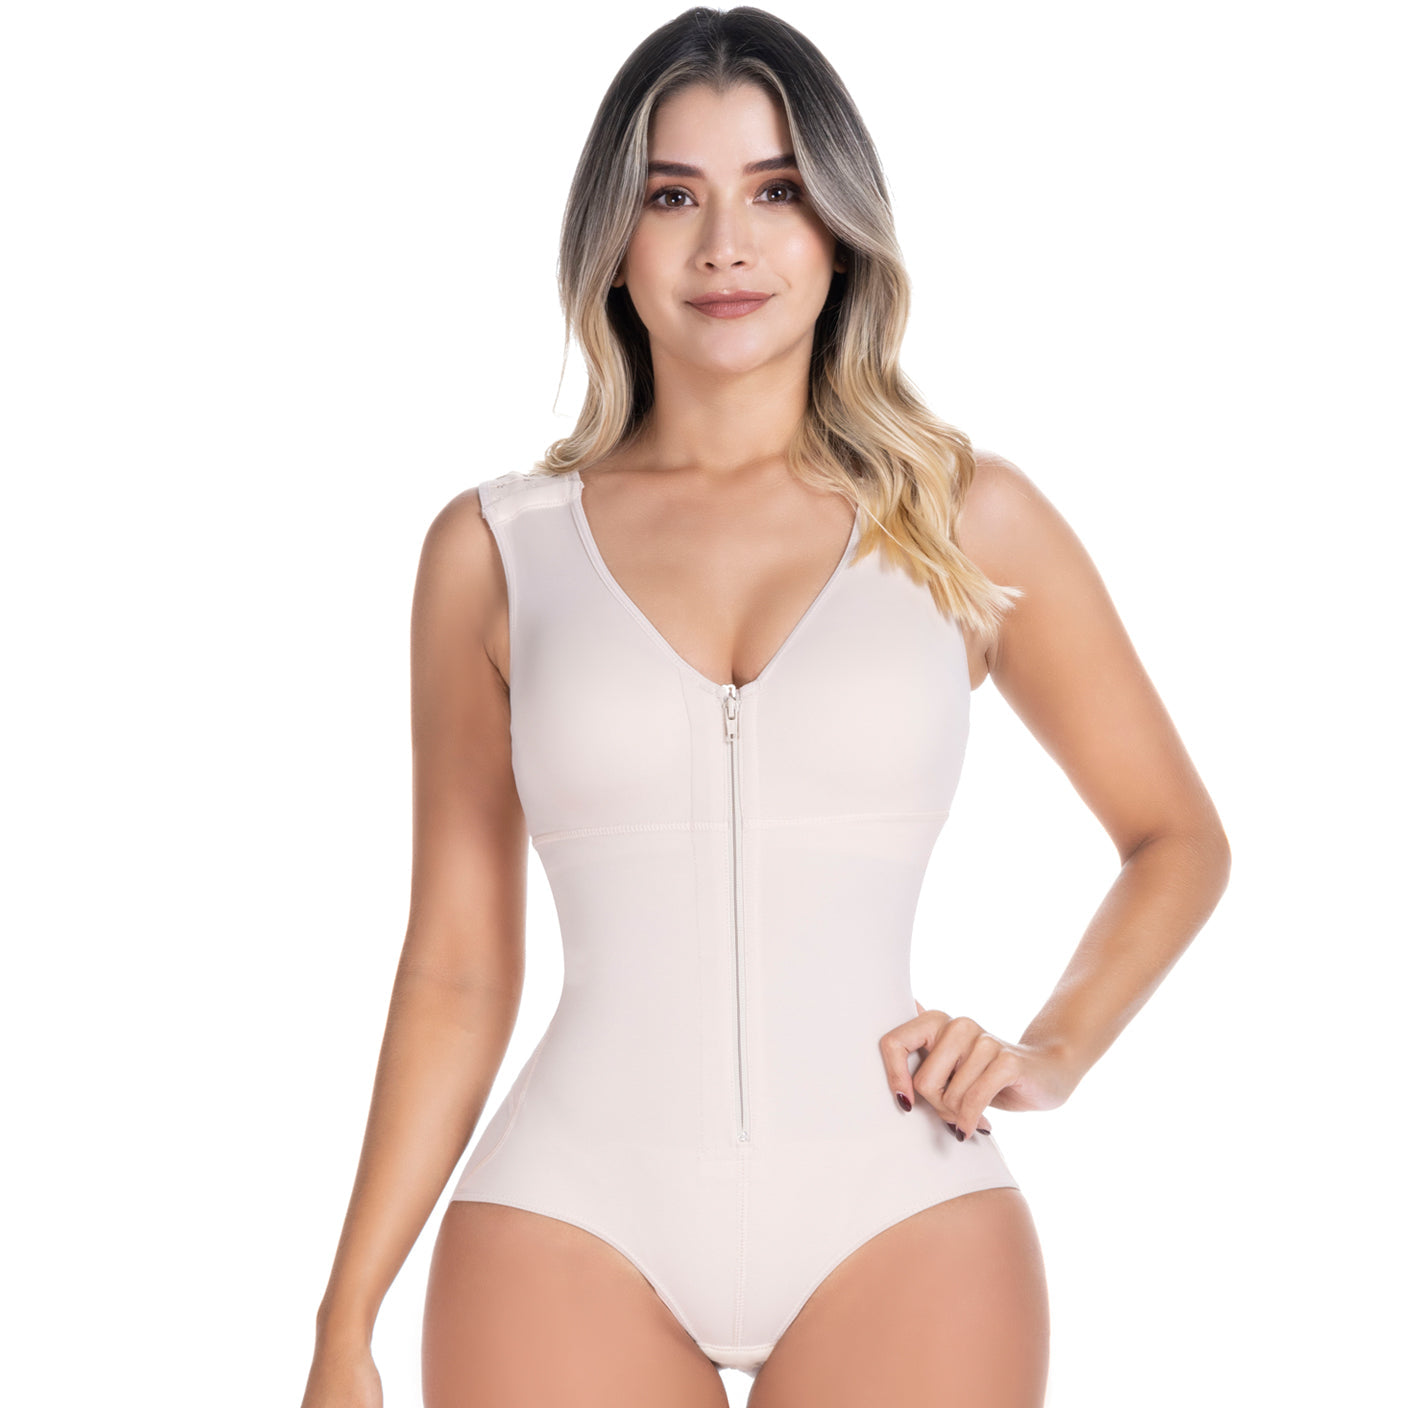 Postpartum C-Section Shapewear: Discreet & Supportive SON-055